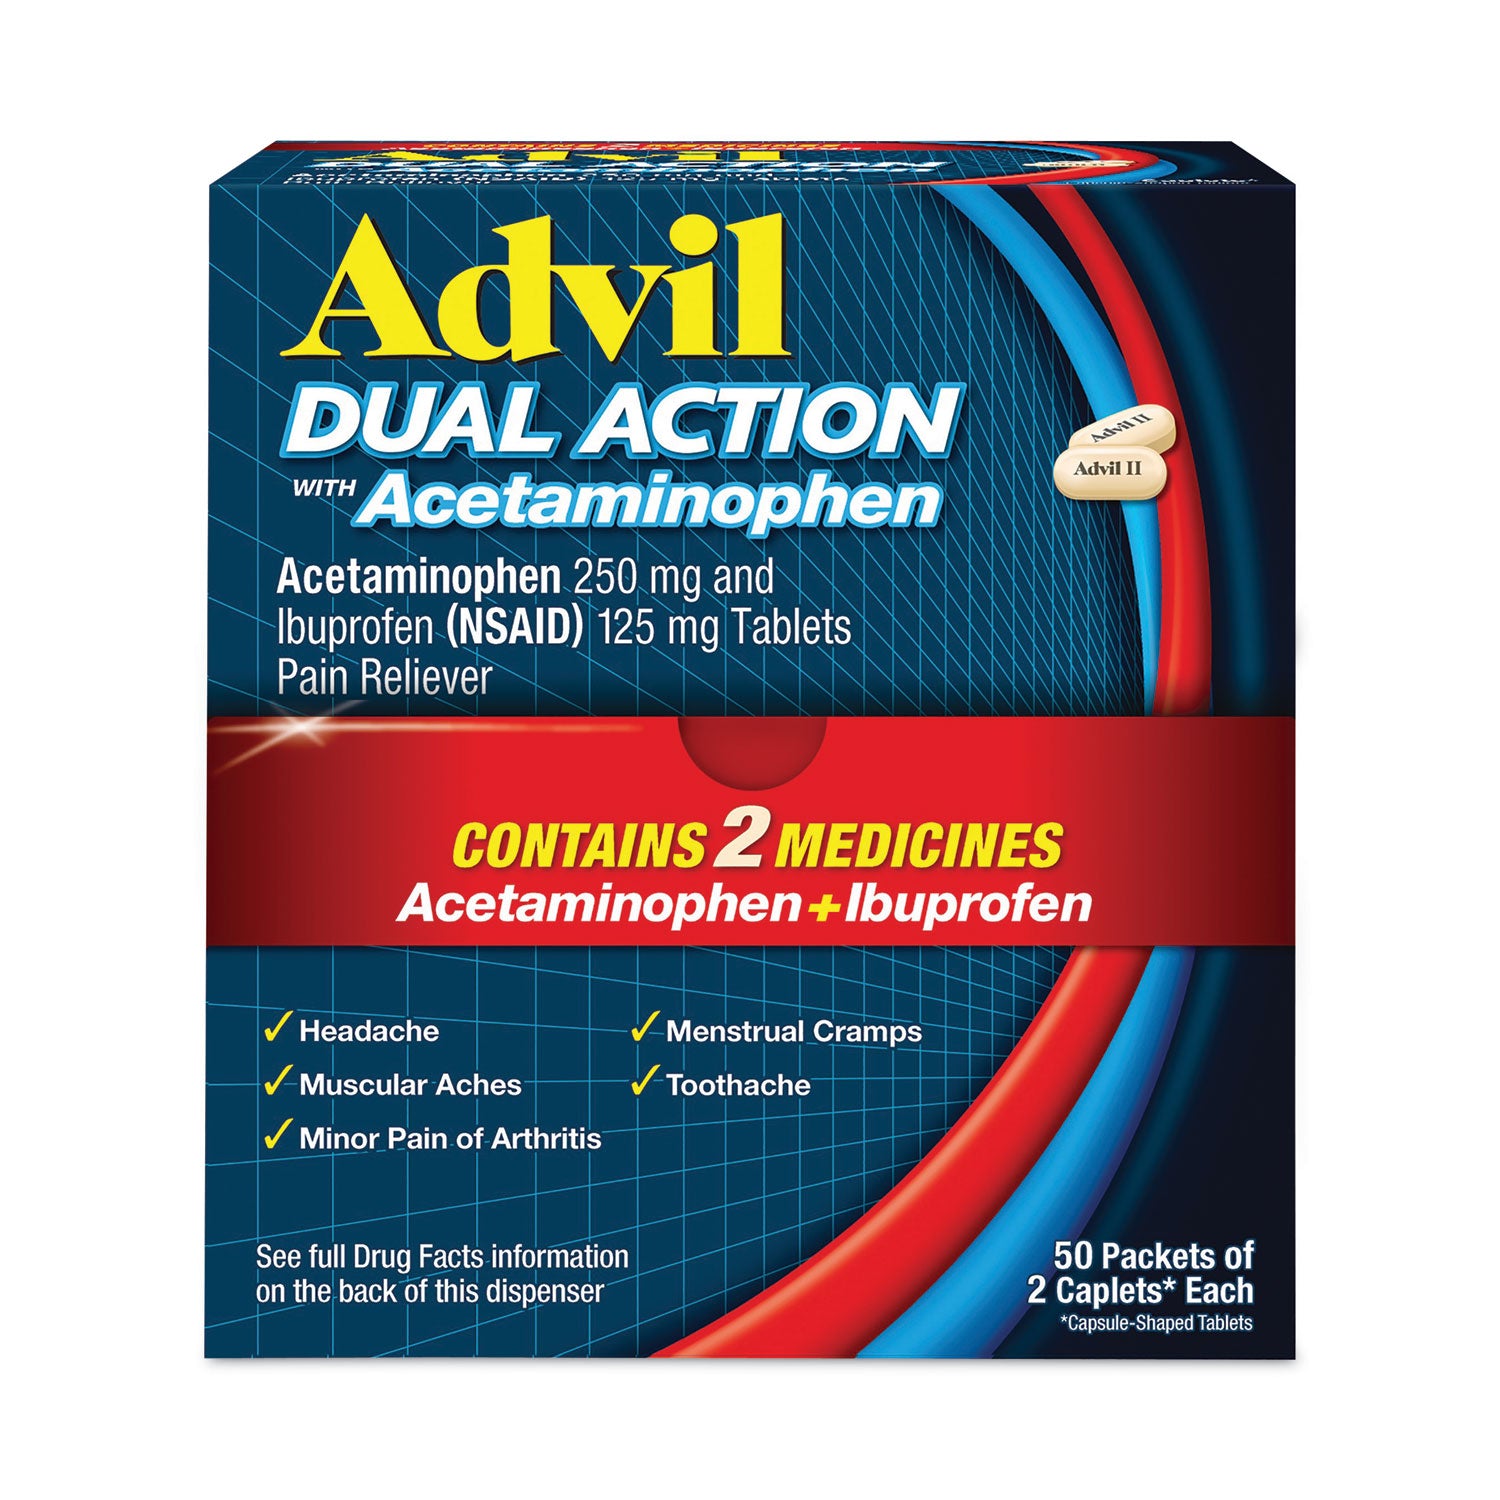 dual-action-with-acetaminophen-and-ibuprofen-caplets-50-packets-of-2-caplets_avl014795 - 1